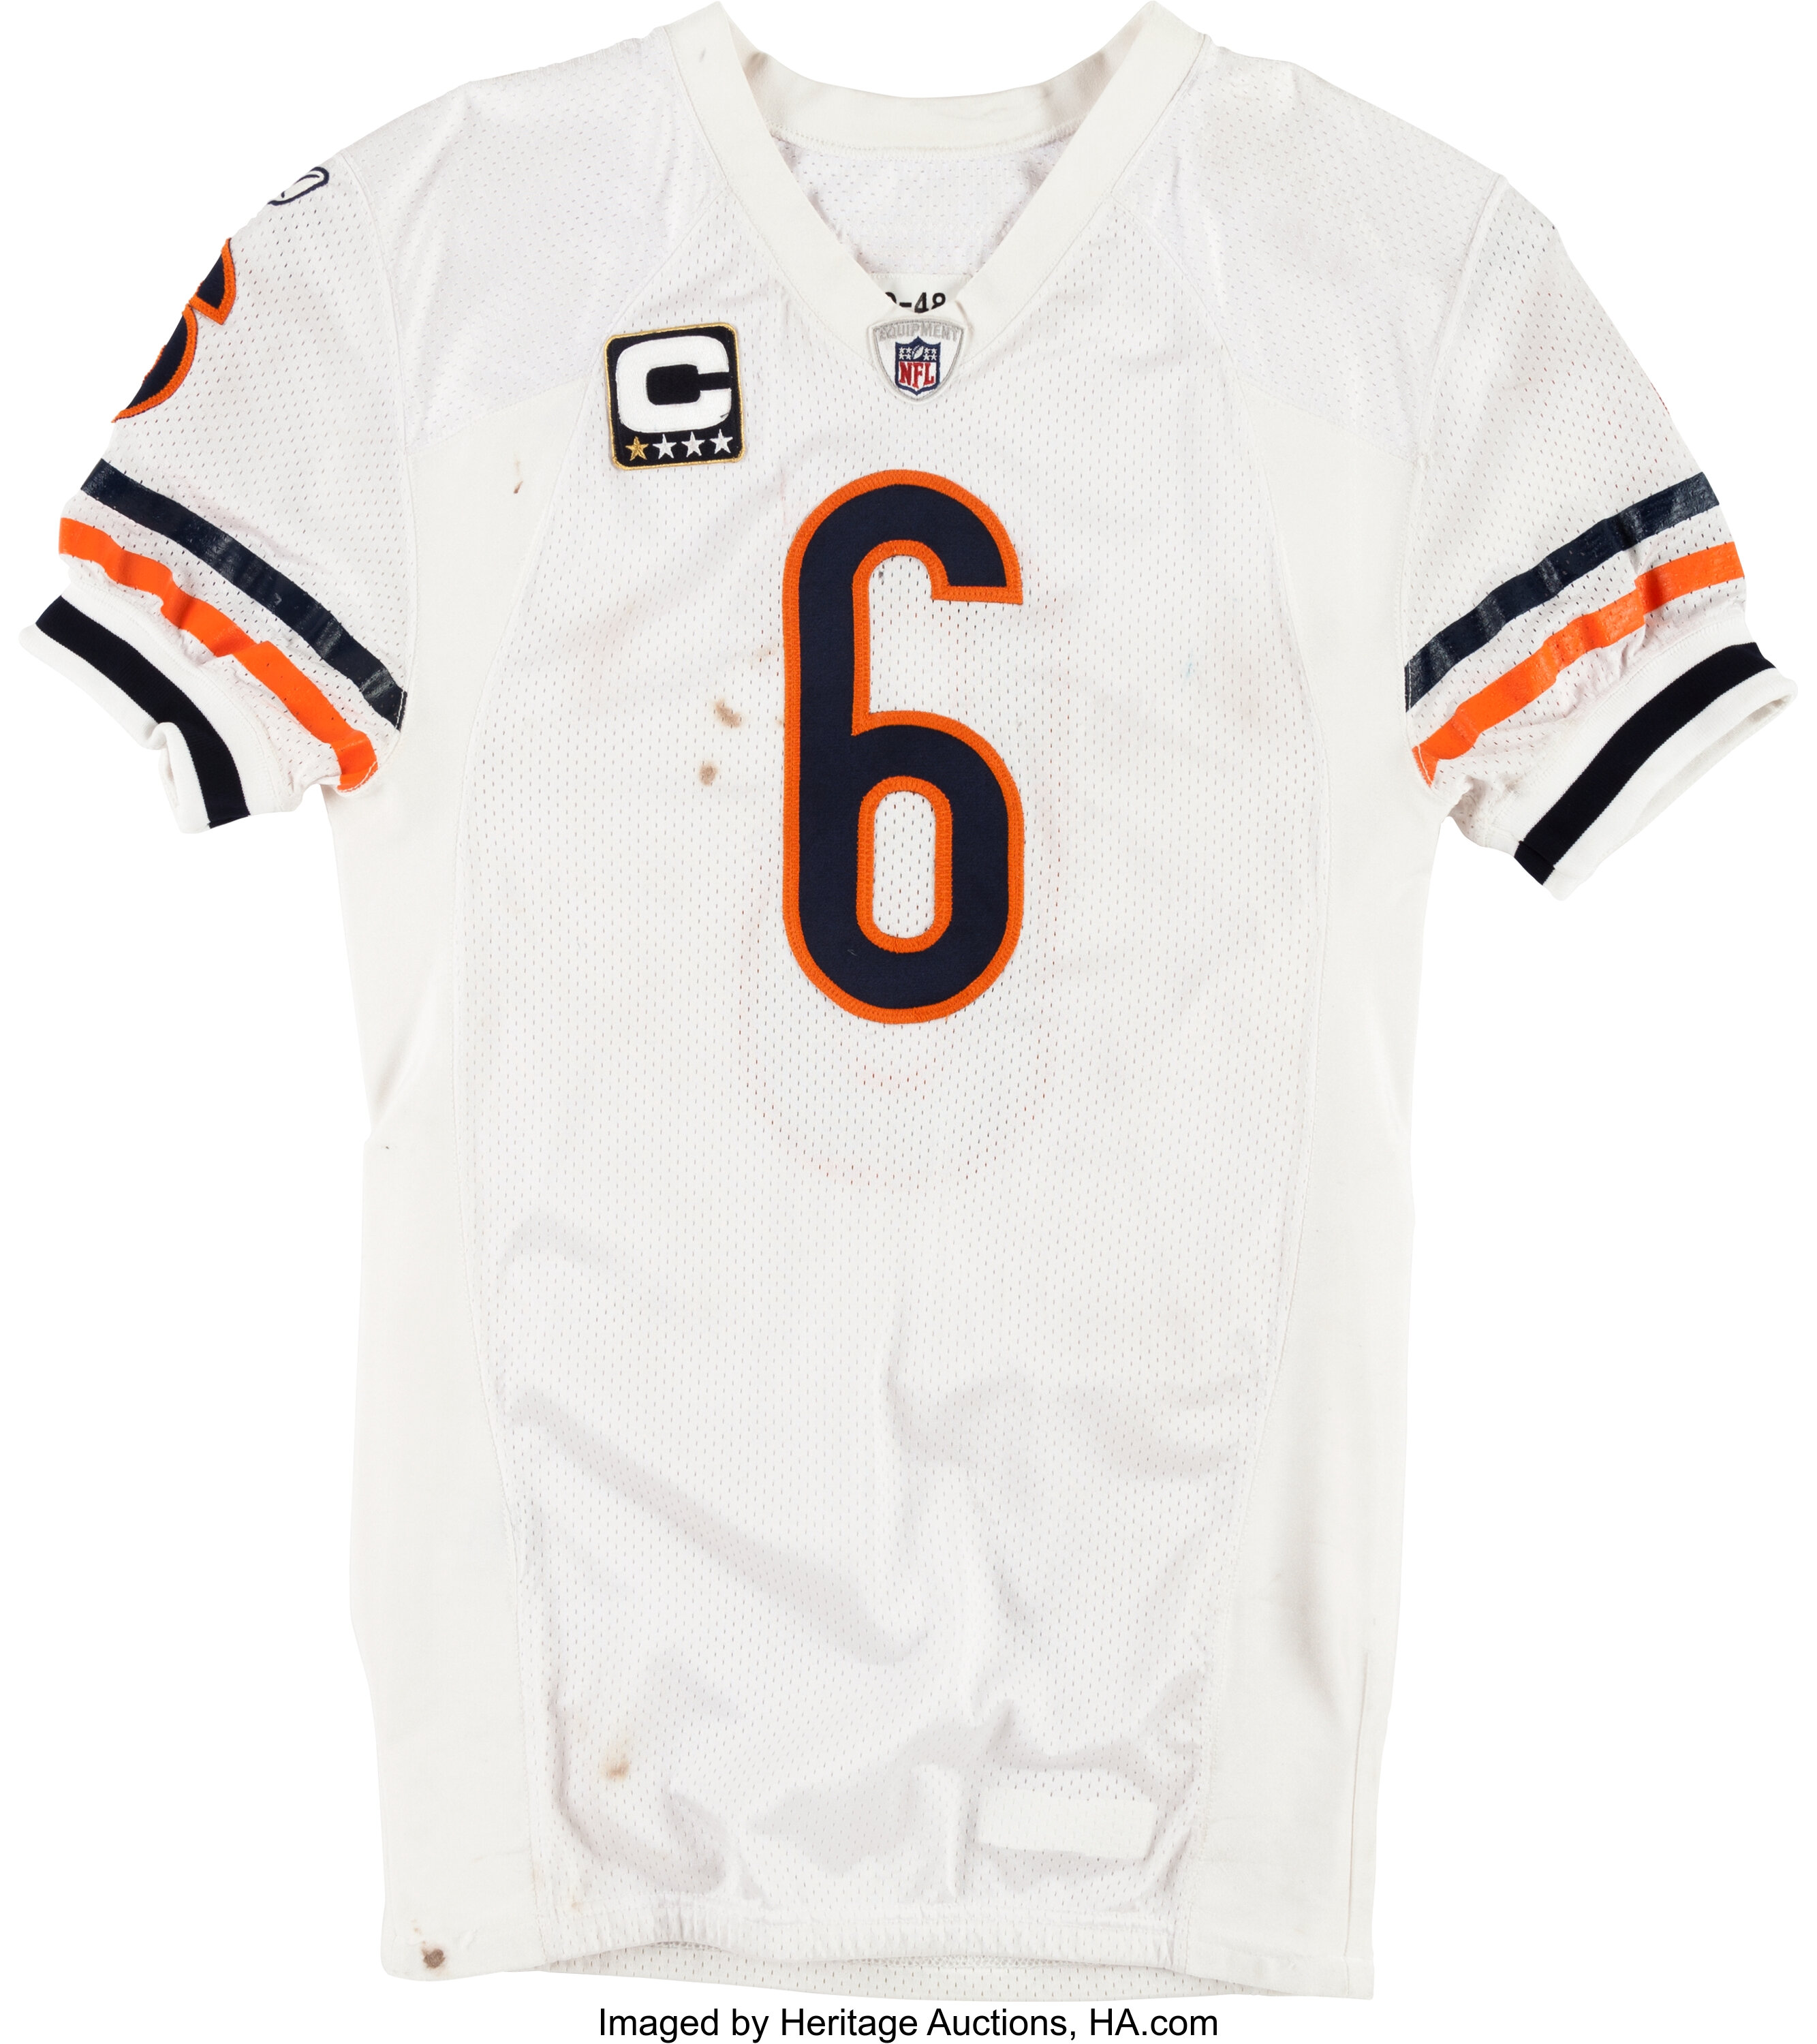 2009 Jay Cutler Game Worn, Unwashed Chicago Bears Jersey and Pants